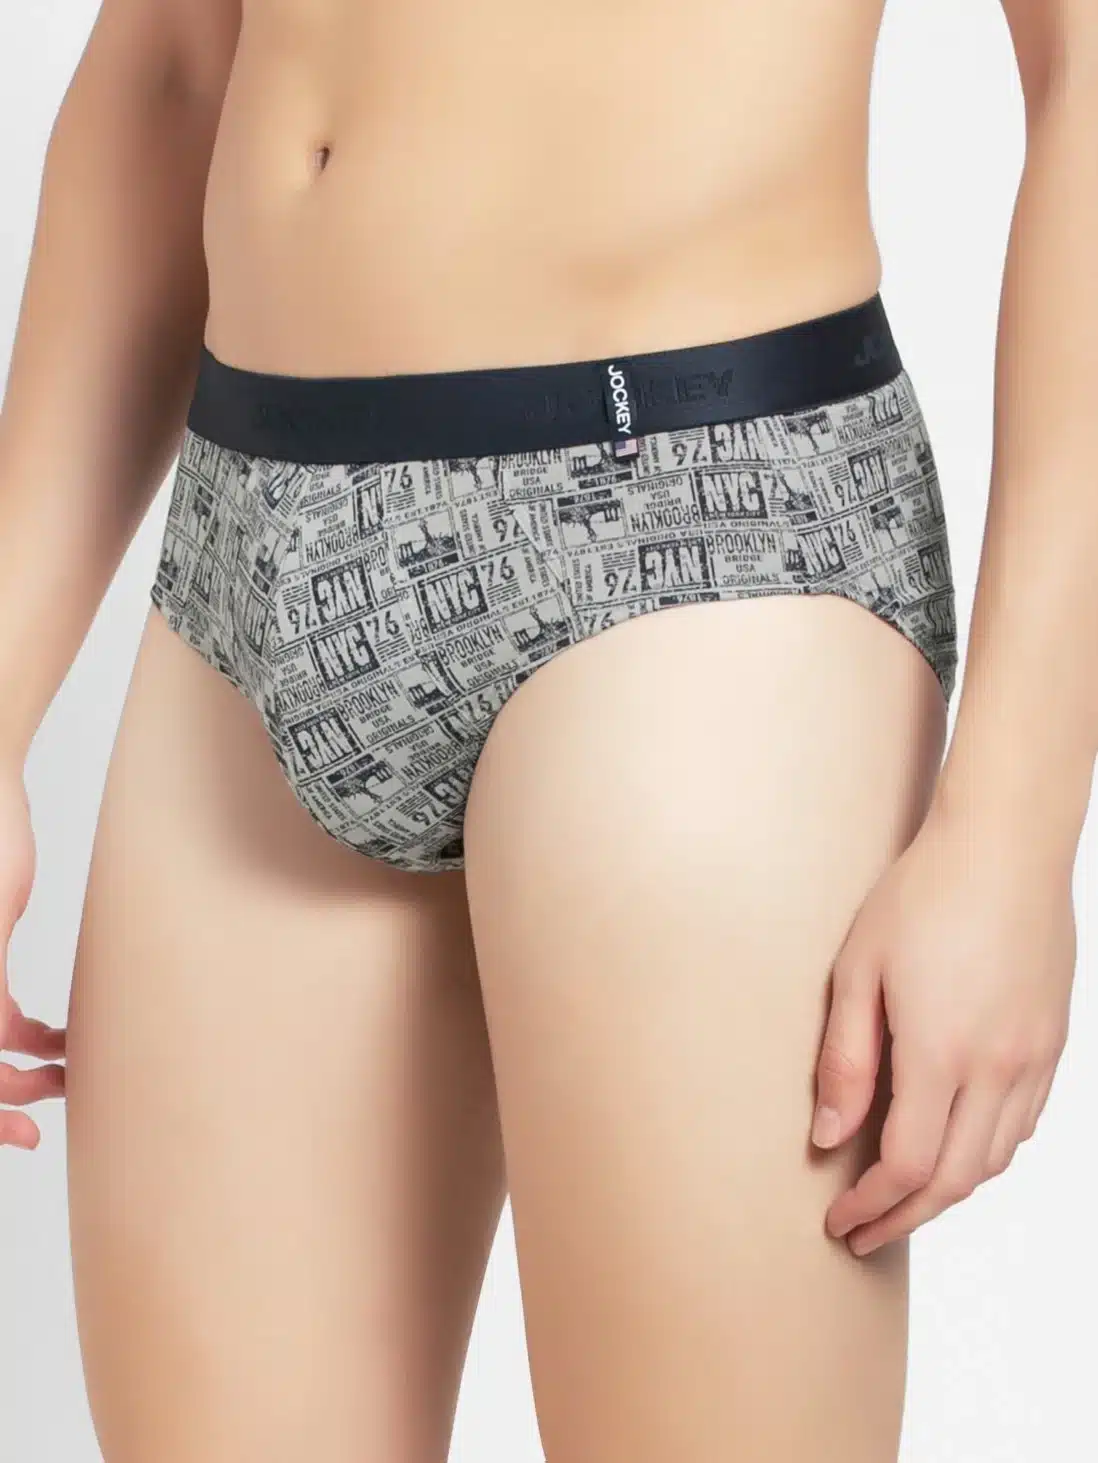 Briefs with Exposed Waistband (Pack of 2) Assorted Prints #US52